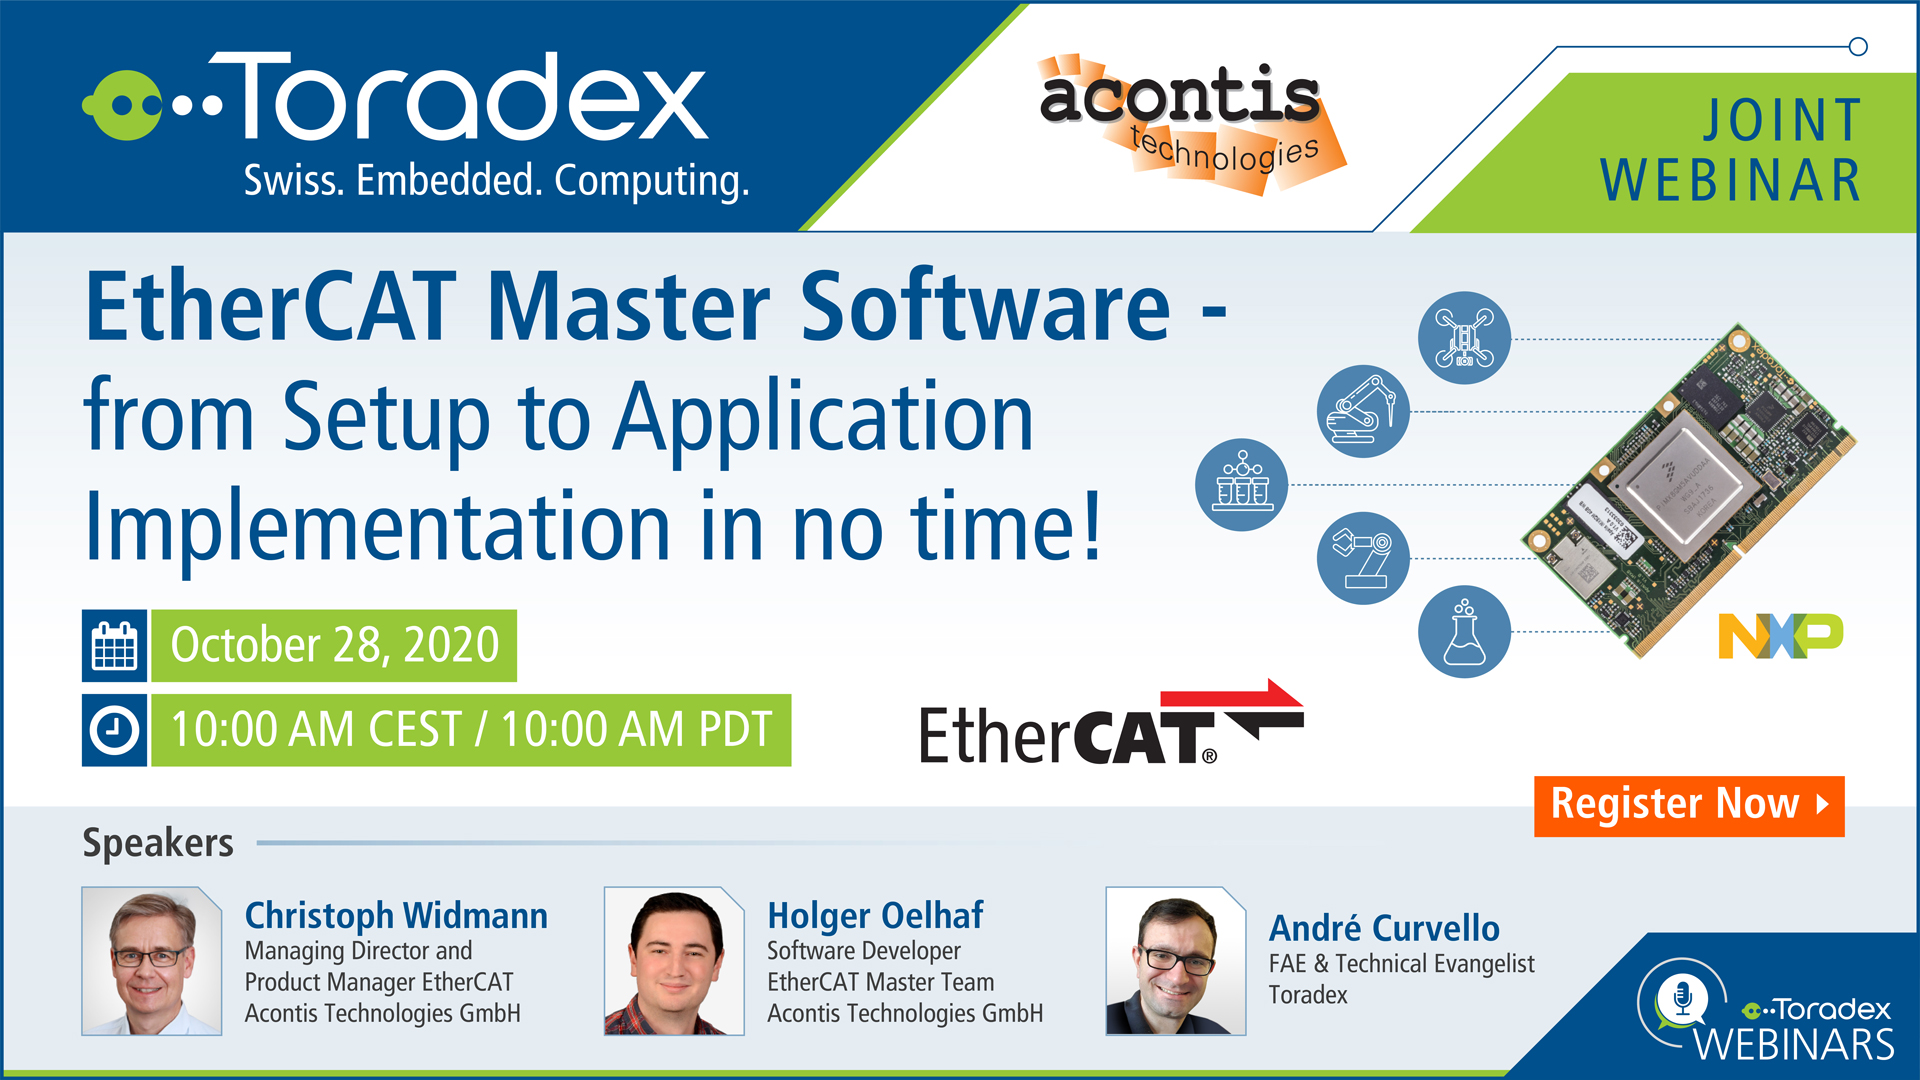 Webinar: EtherCAT Master Software - from Setup to Application Implementation in no time!, Horw, Luzern, Switzerland